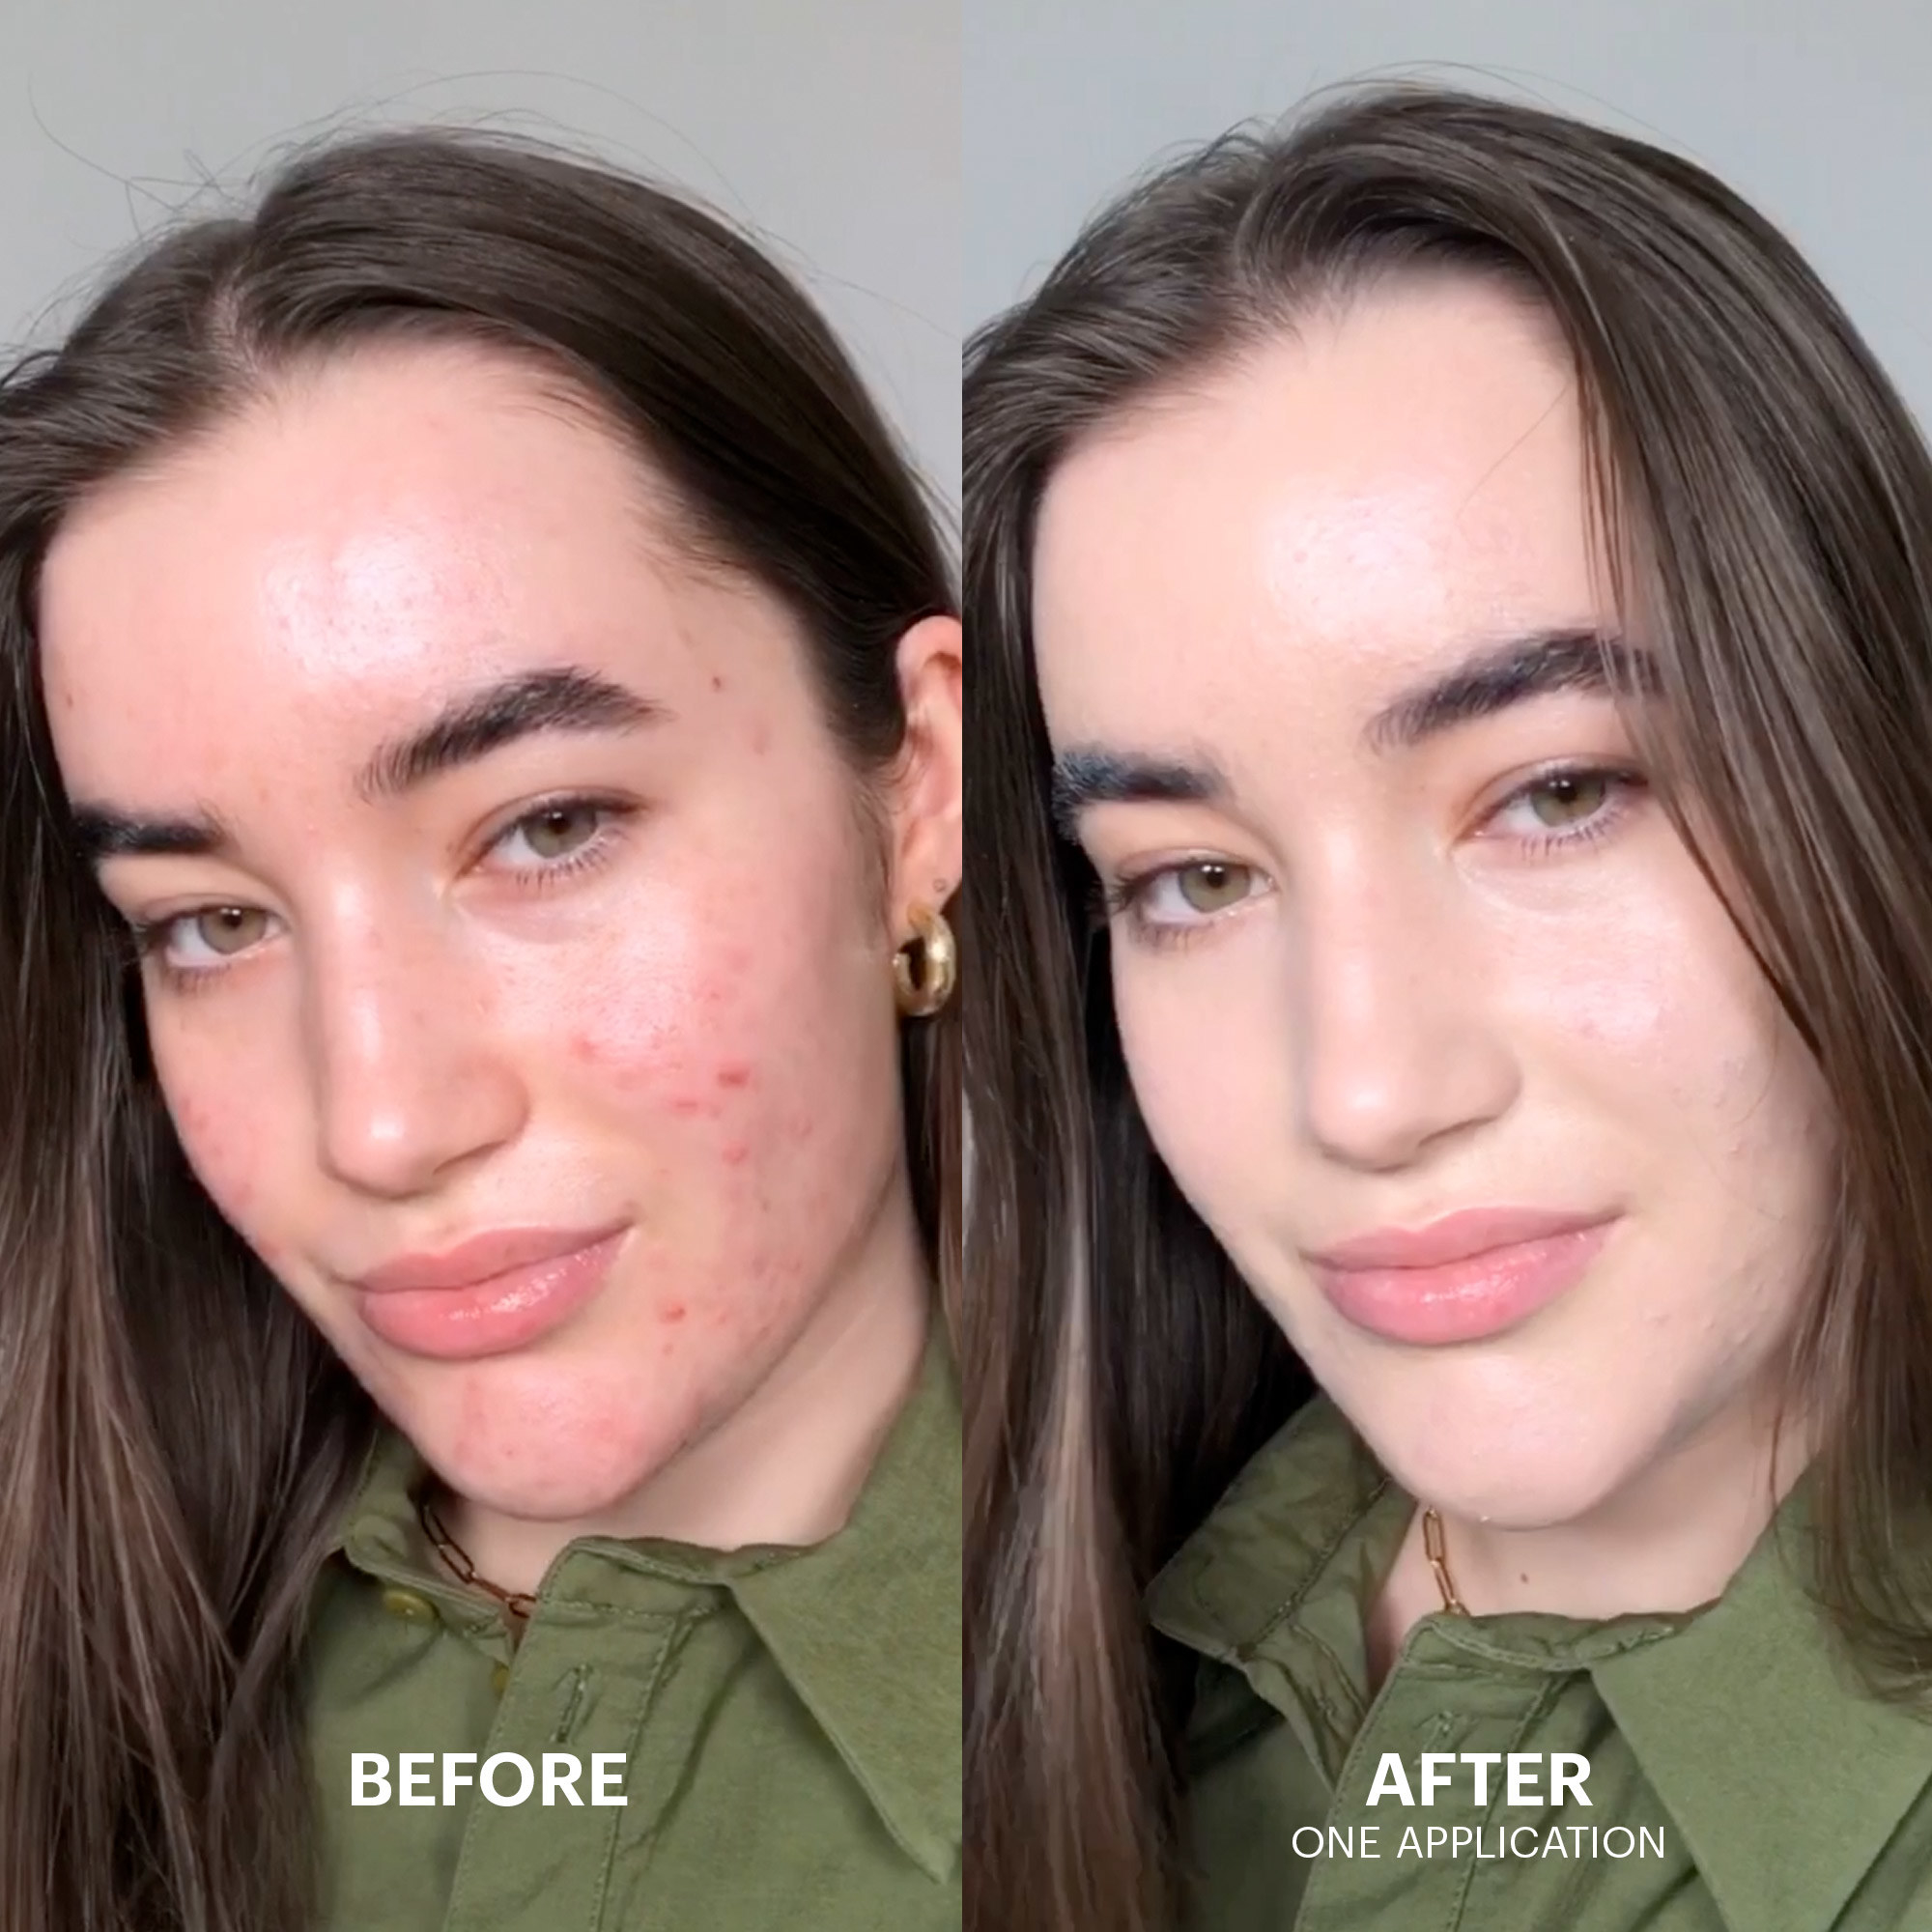 A before and after of someone using the cream